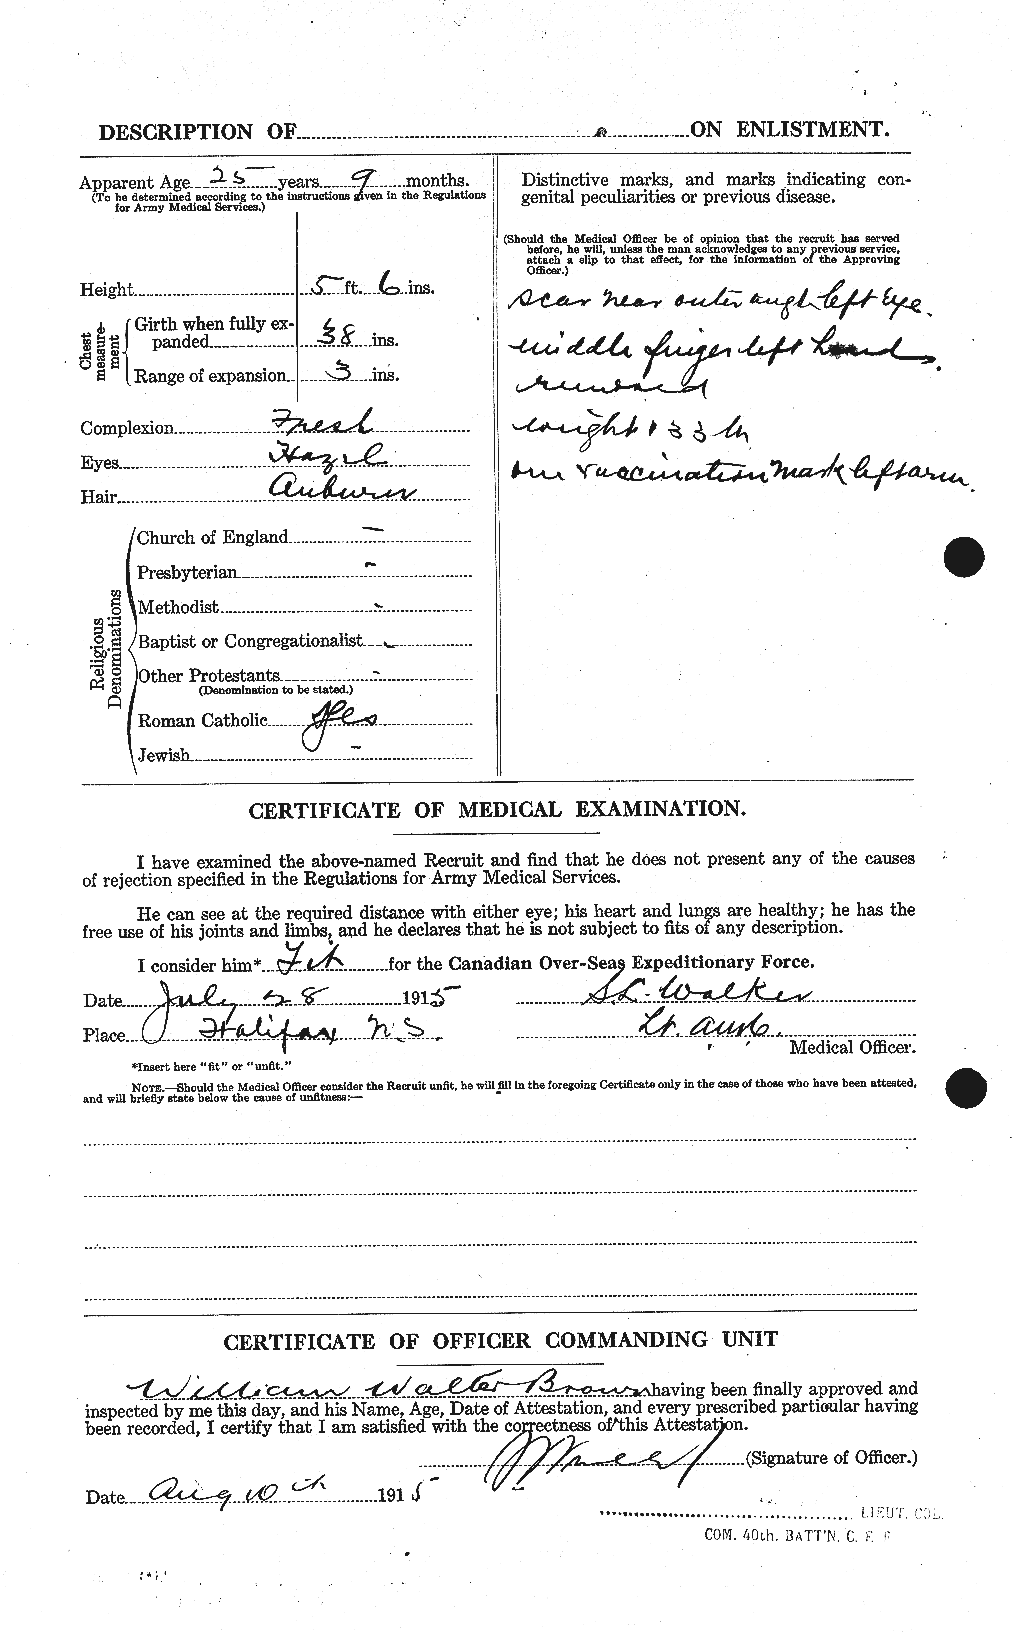 Personnel Records of the First World War - CEF 270899b